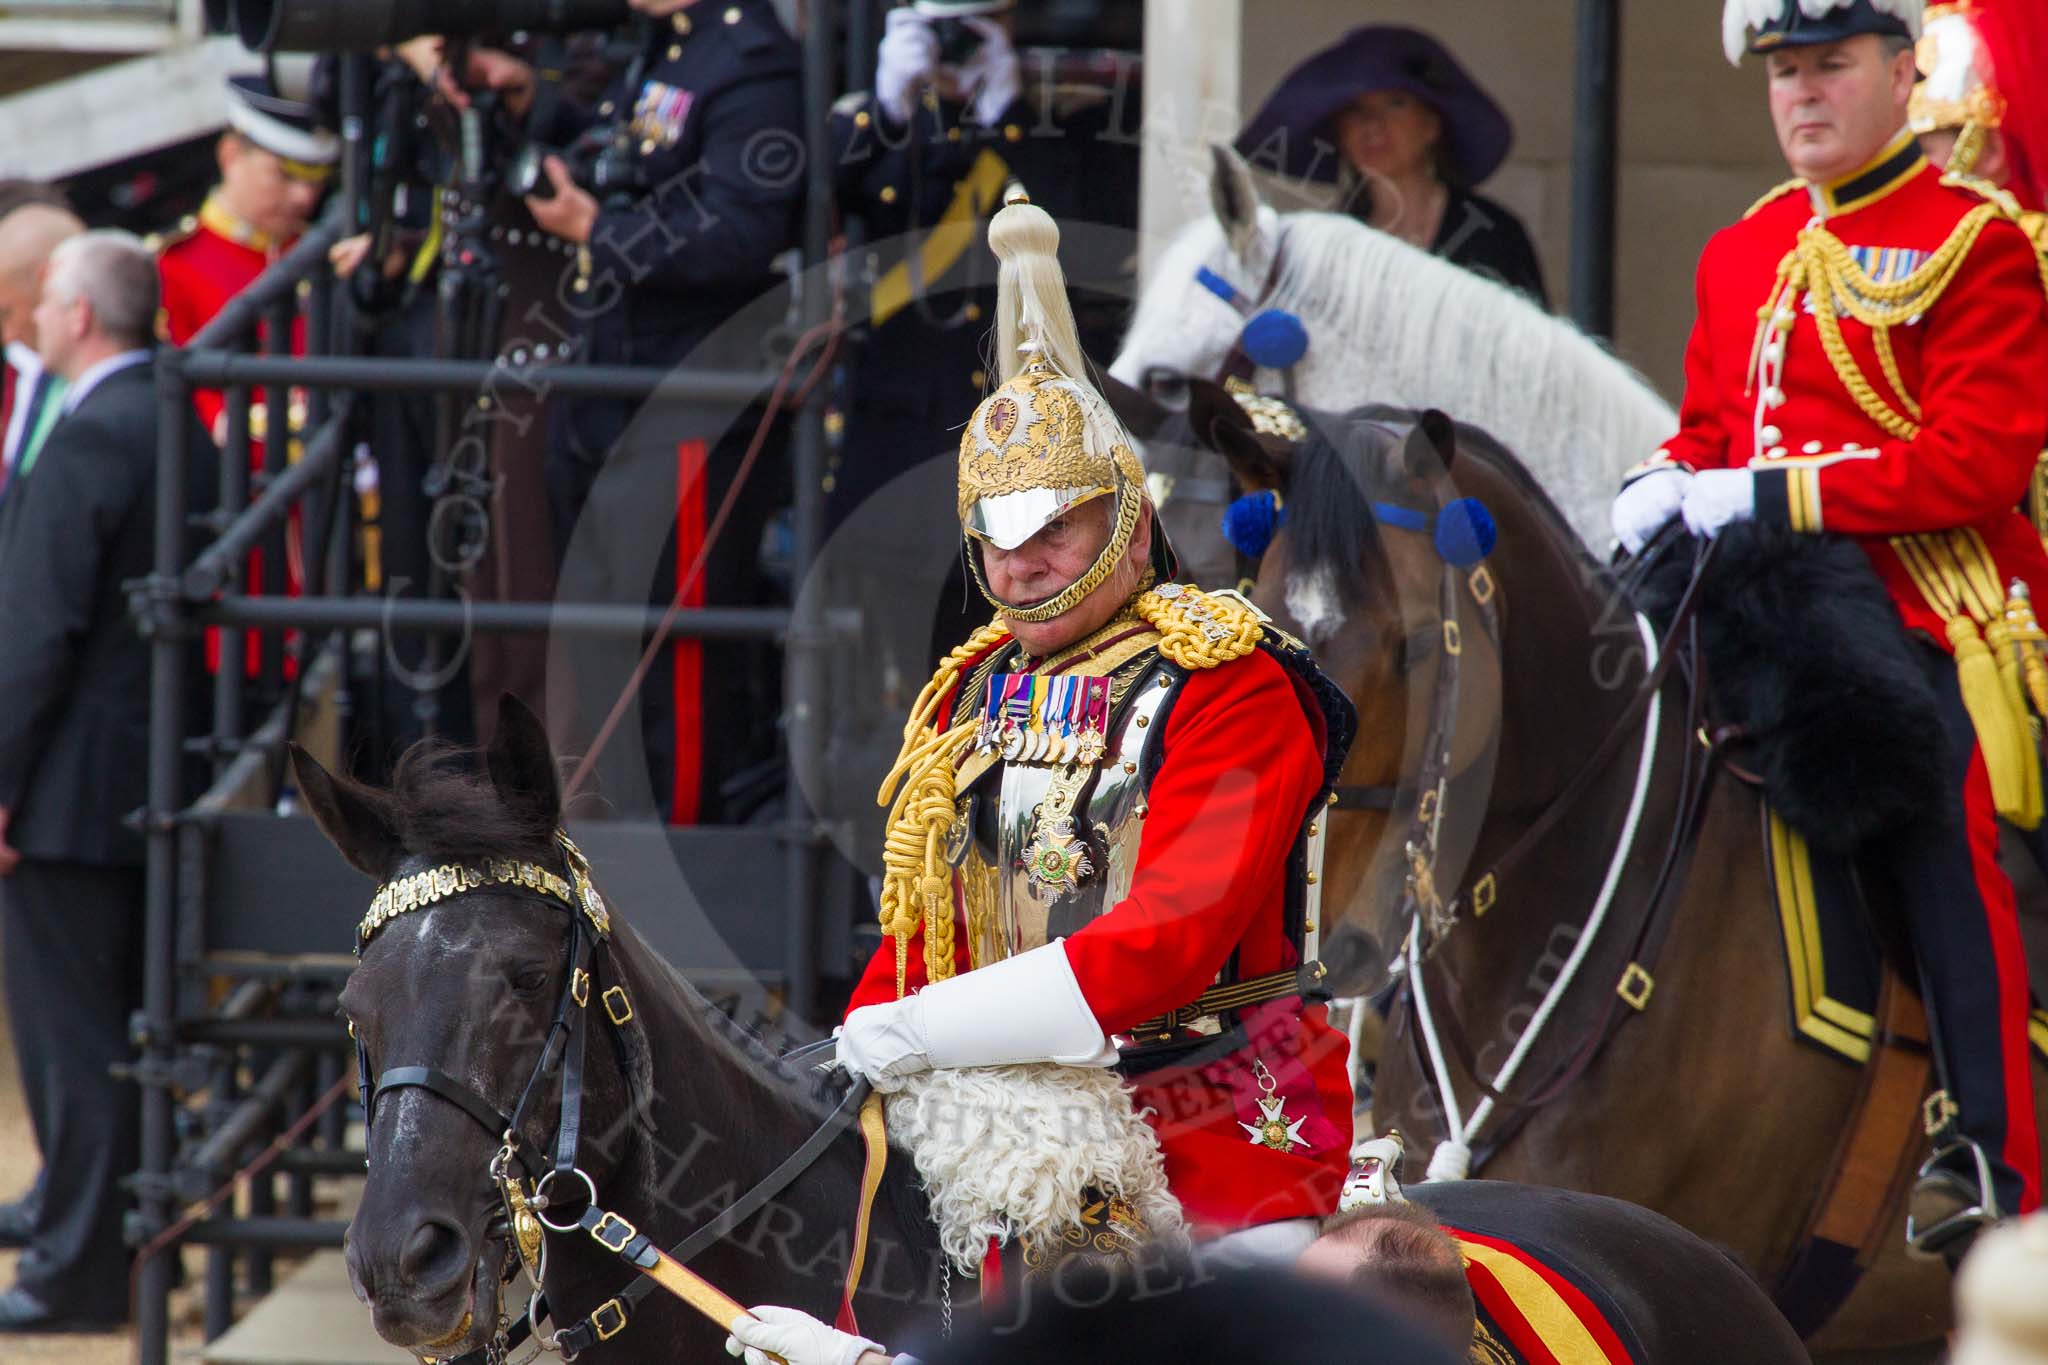 Trooping the Colour 2014.
Horse Guards Parade, Westminster,
London SW1A,

United Kingdom,
on 14 June 2014 at 12:14, image #908